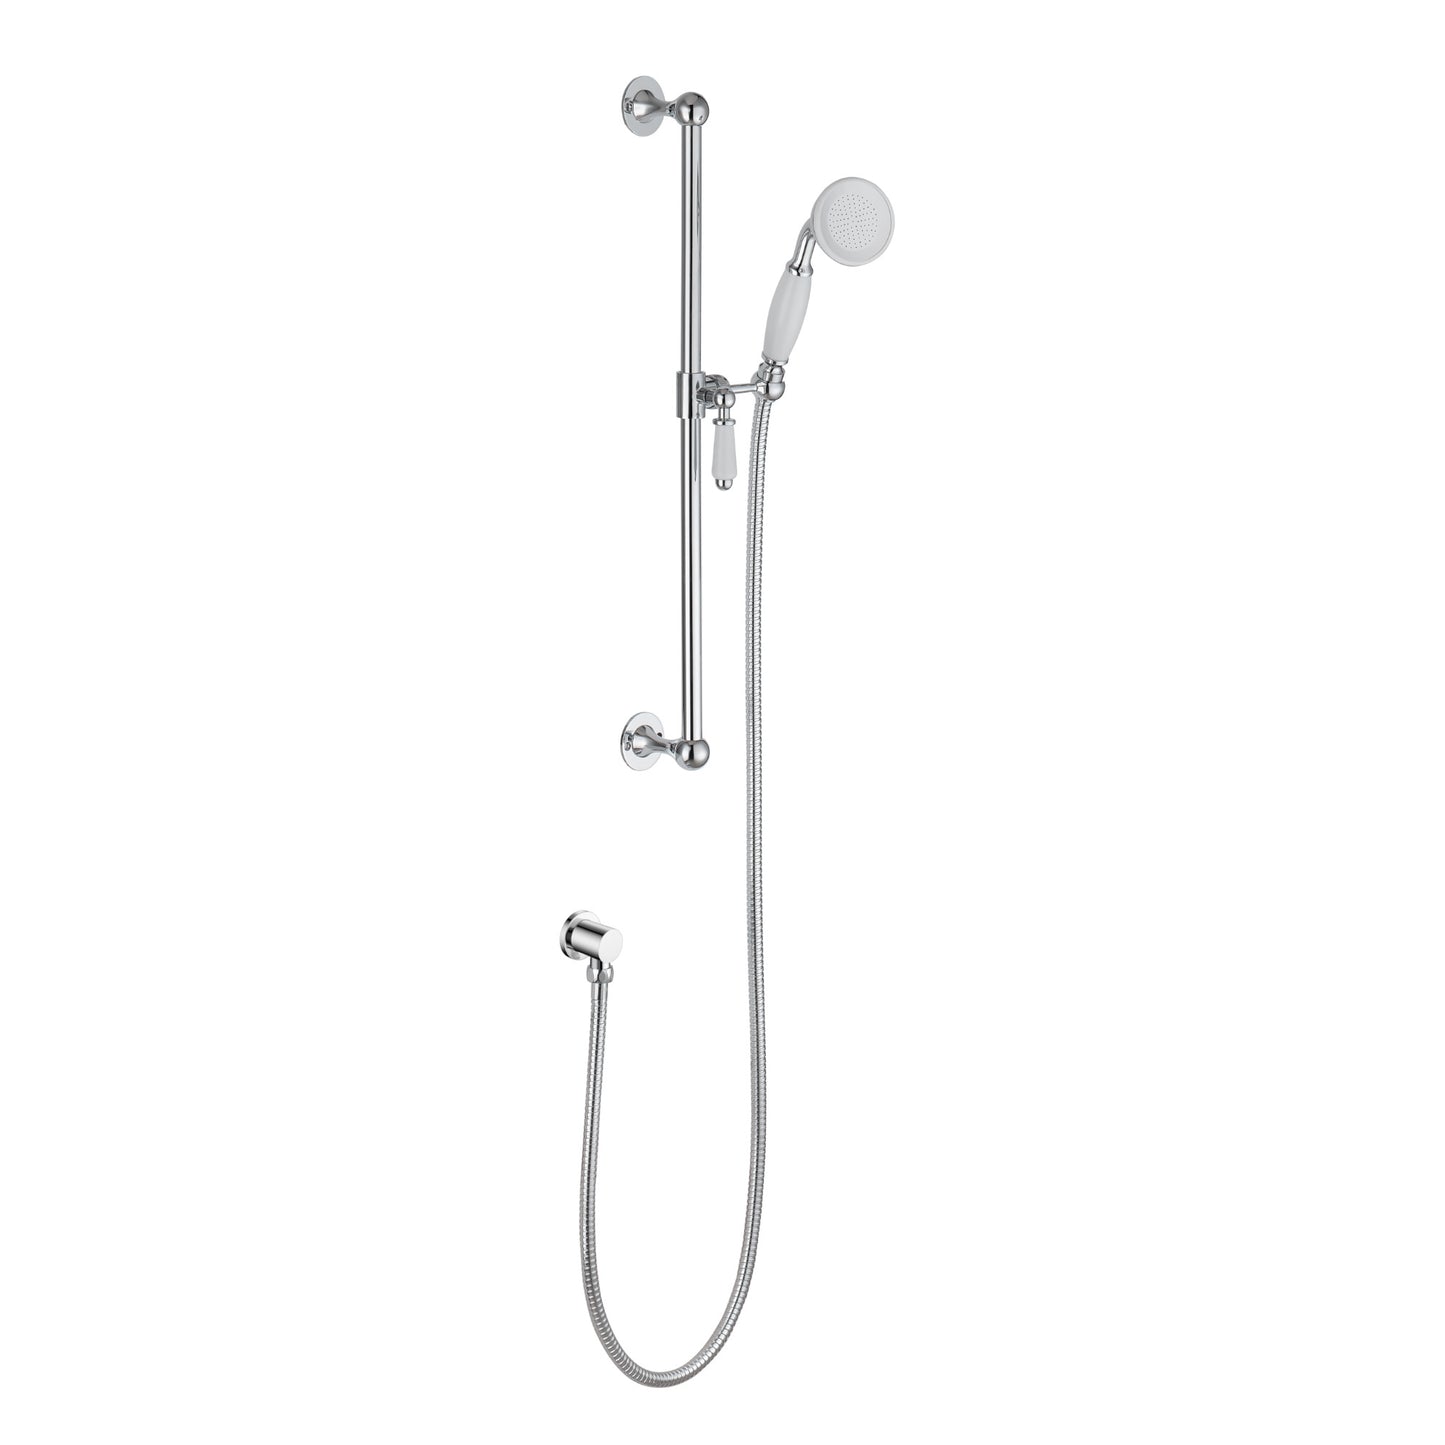 Traditional Shower Slider Rail Kit Lever Design With Brass White Ceramic Handset, Hose And Wall Elbow Outlet - Chrome